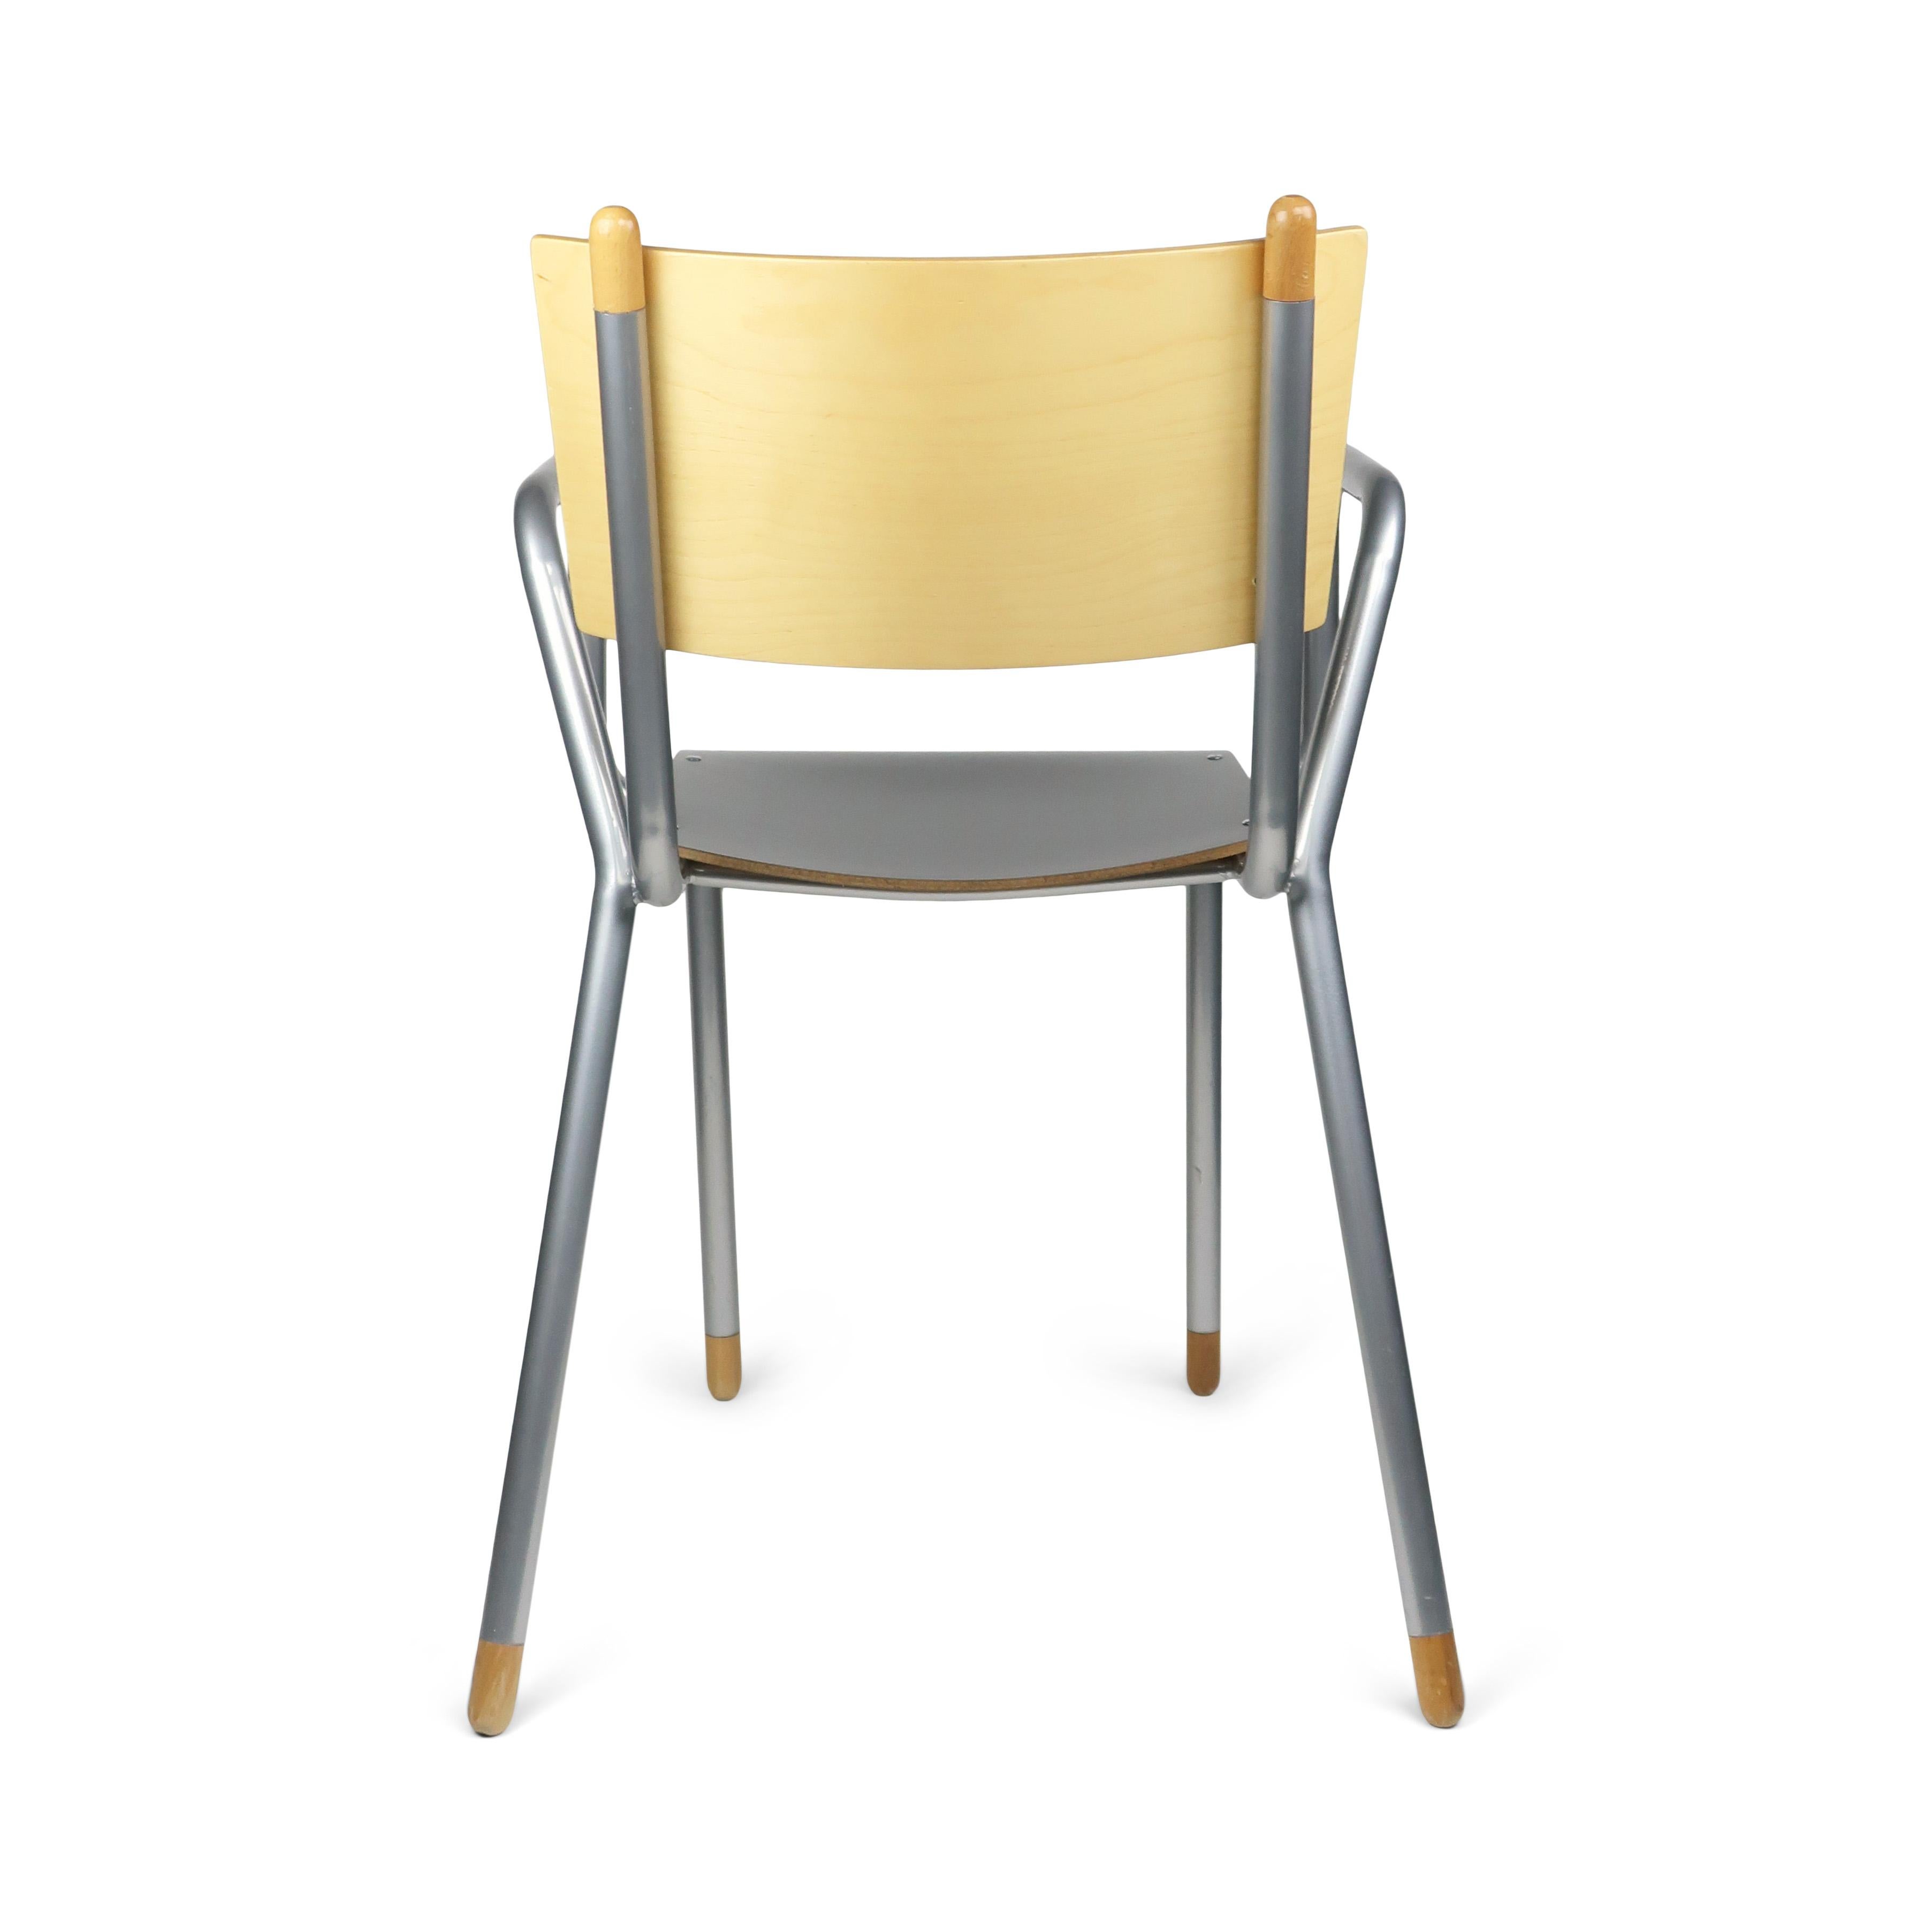 Classe Prima B Armchair by Maurizio Peregalli for ZEUS In Good Condition For Sale In Brooklyn, NY